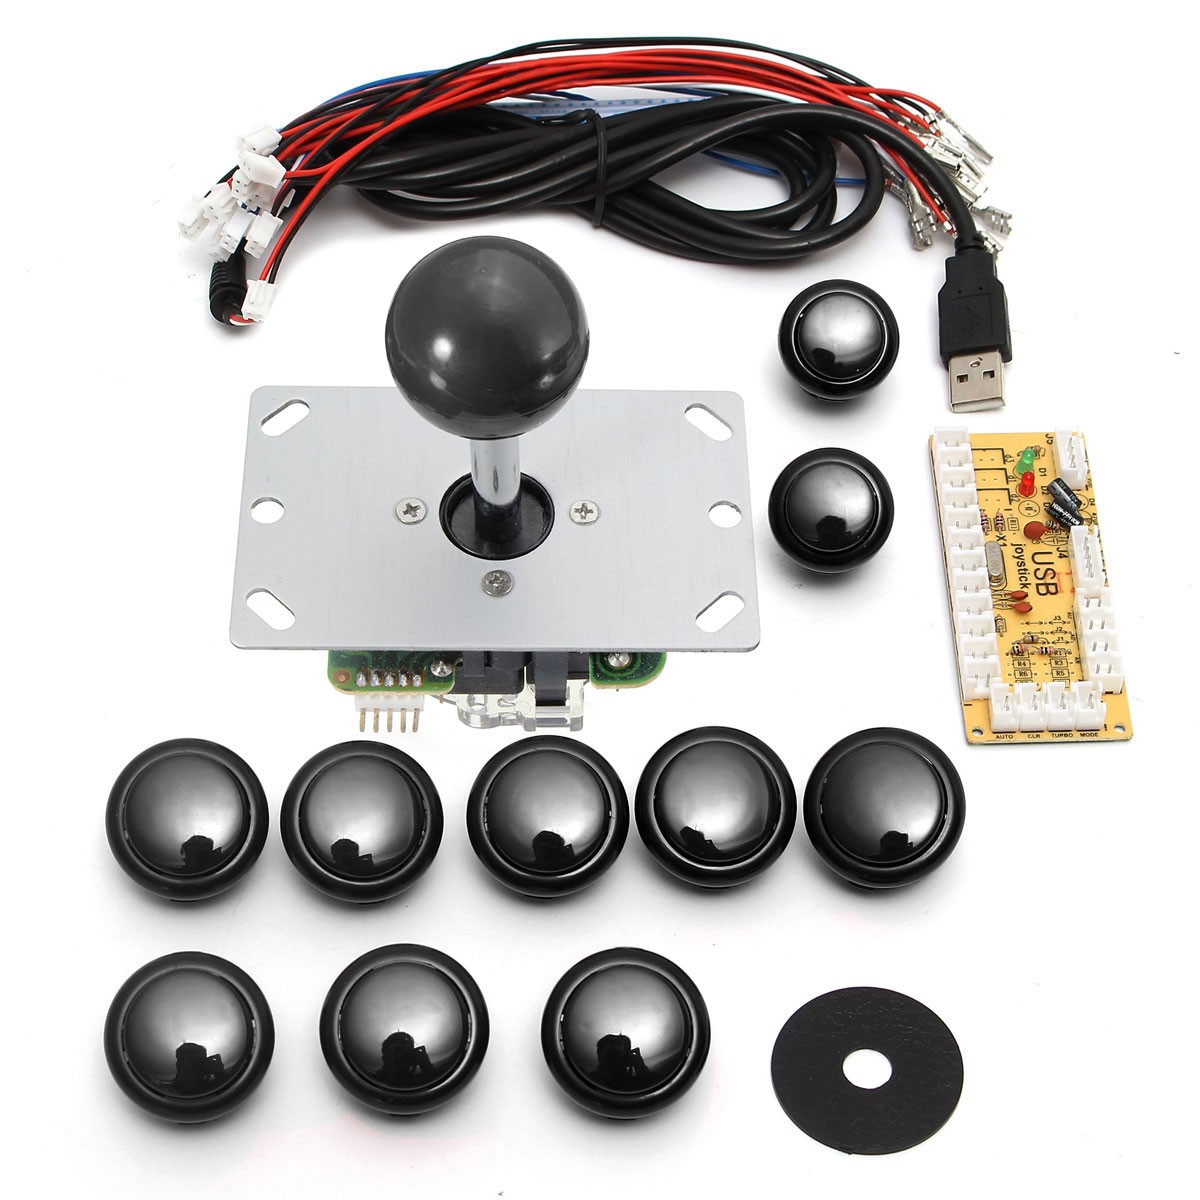 

Dual Players Black Game DIY Arcade Game Console Set Kits Replacement Parts USB Encoders to PC Double Joysticks and Buttons